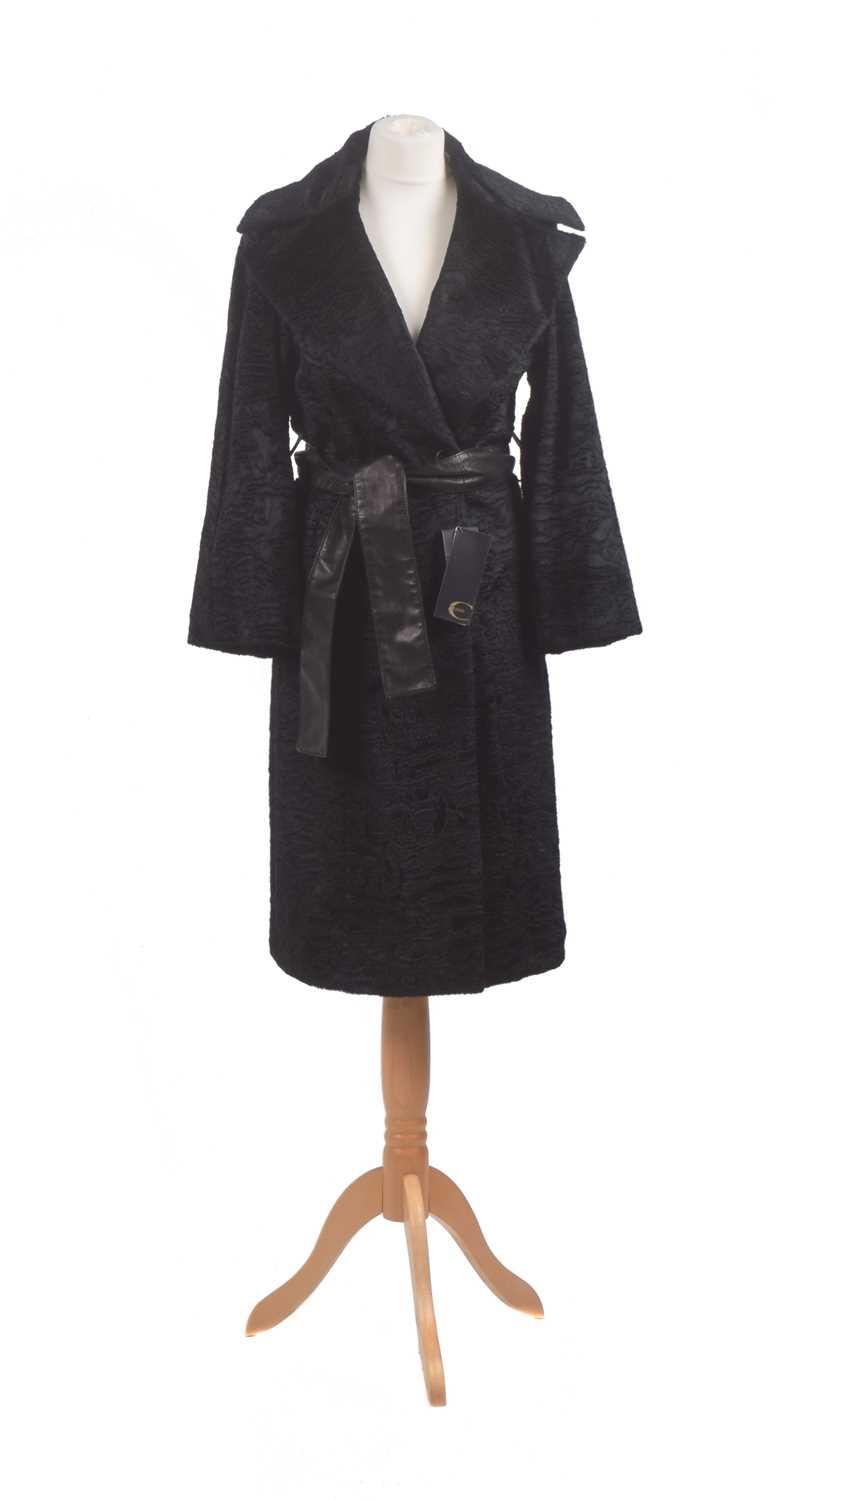 Lot 134 - A coat by Just Cavalli